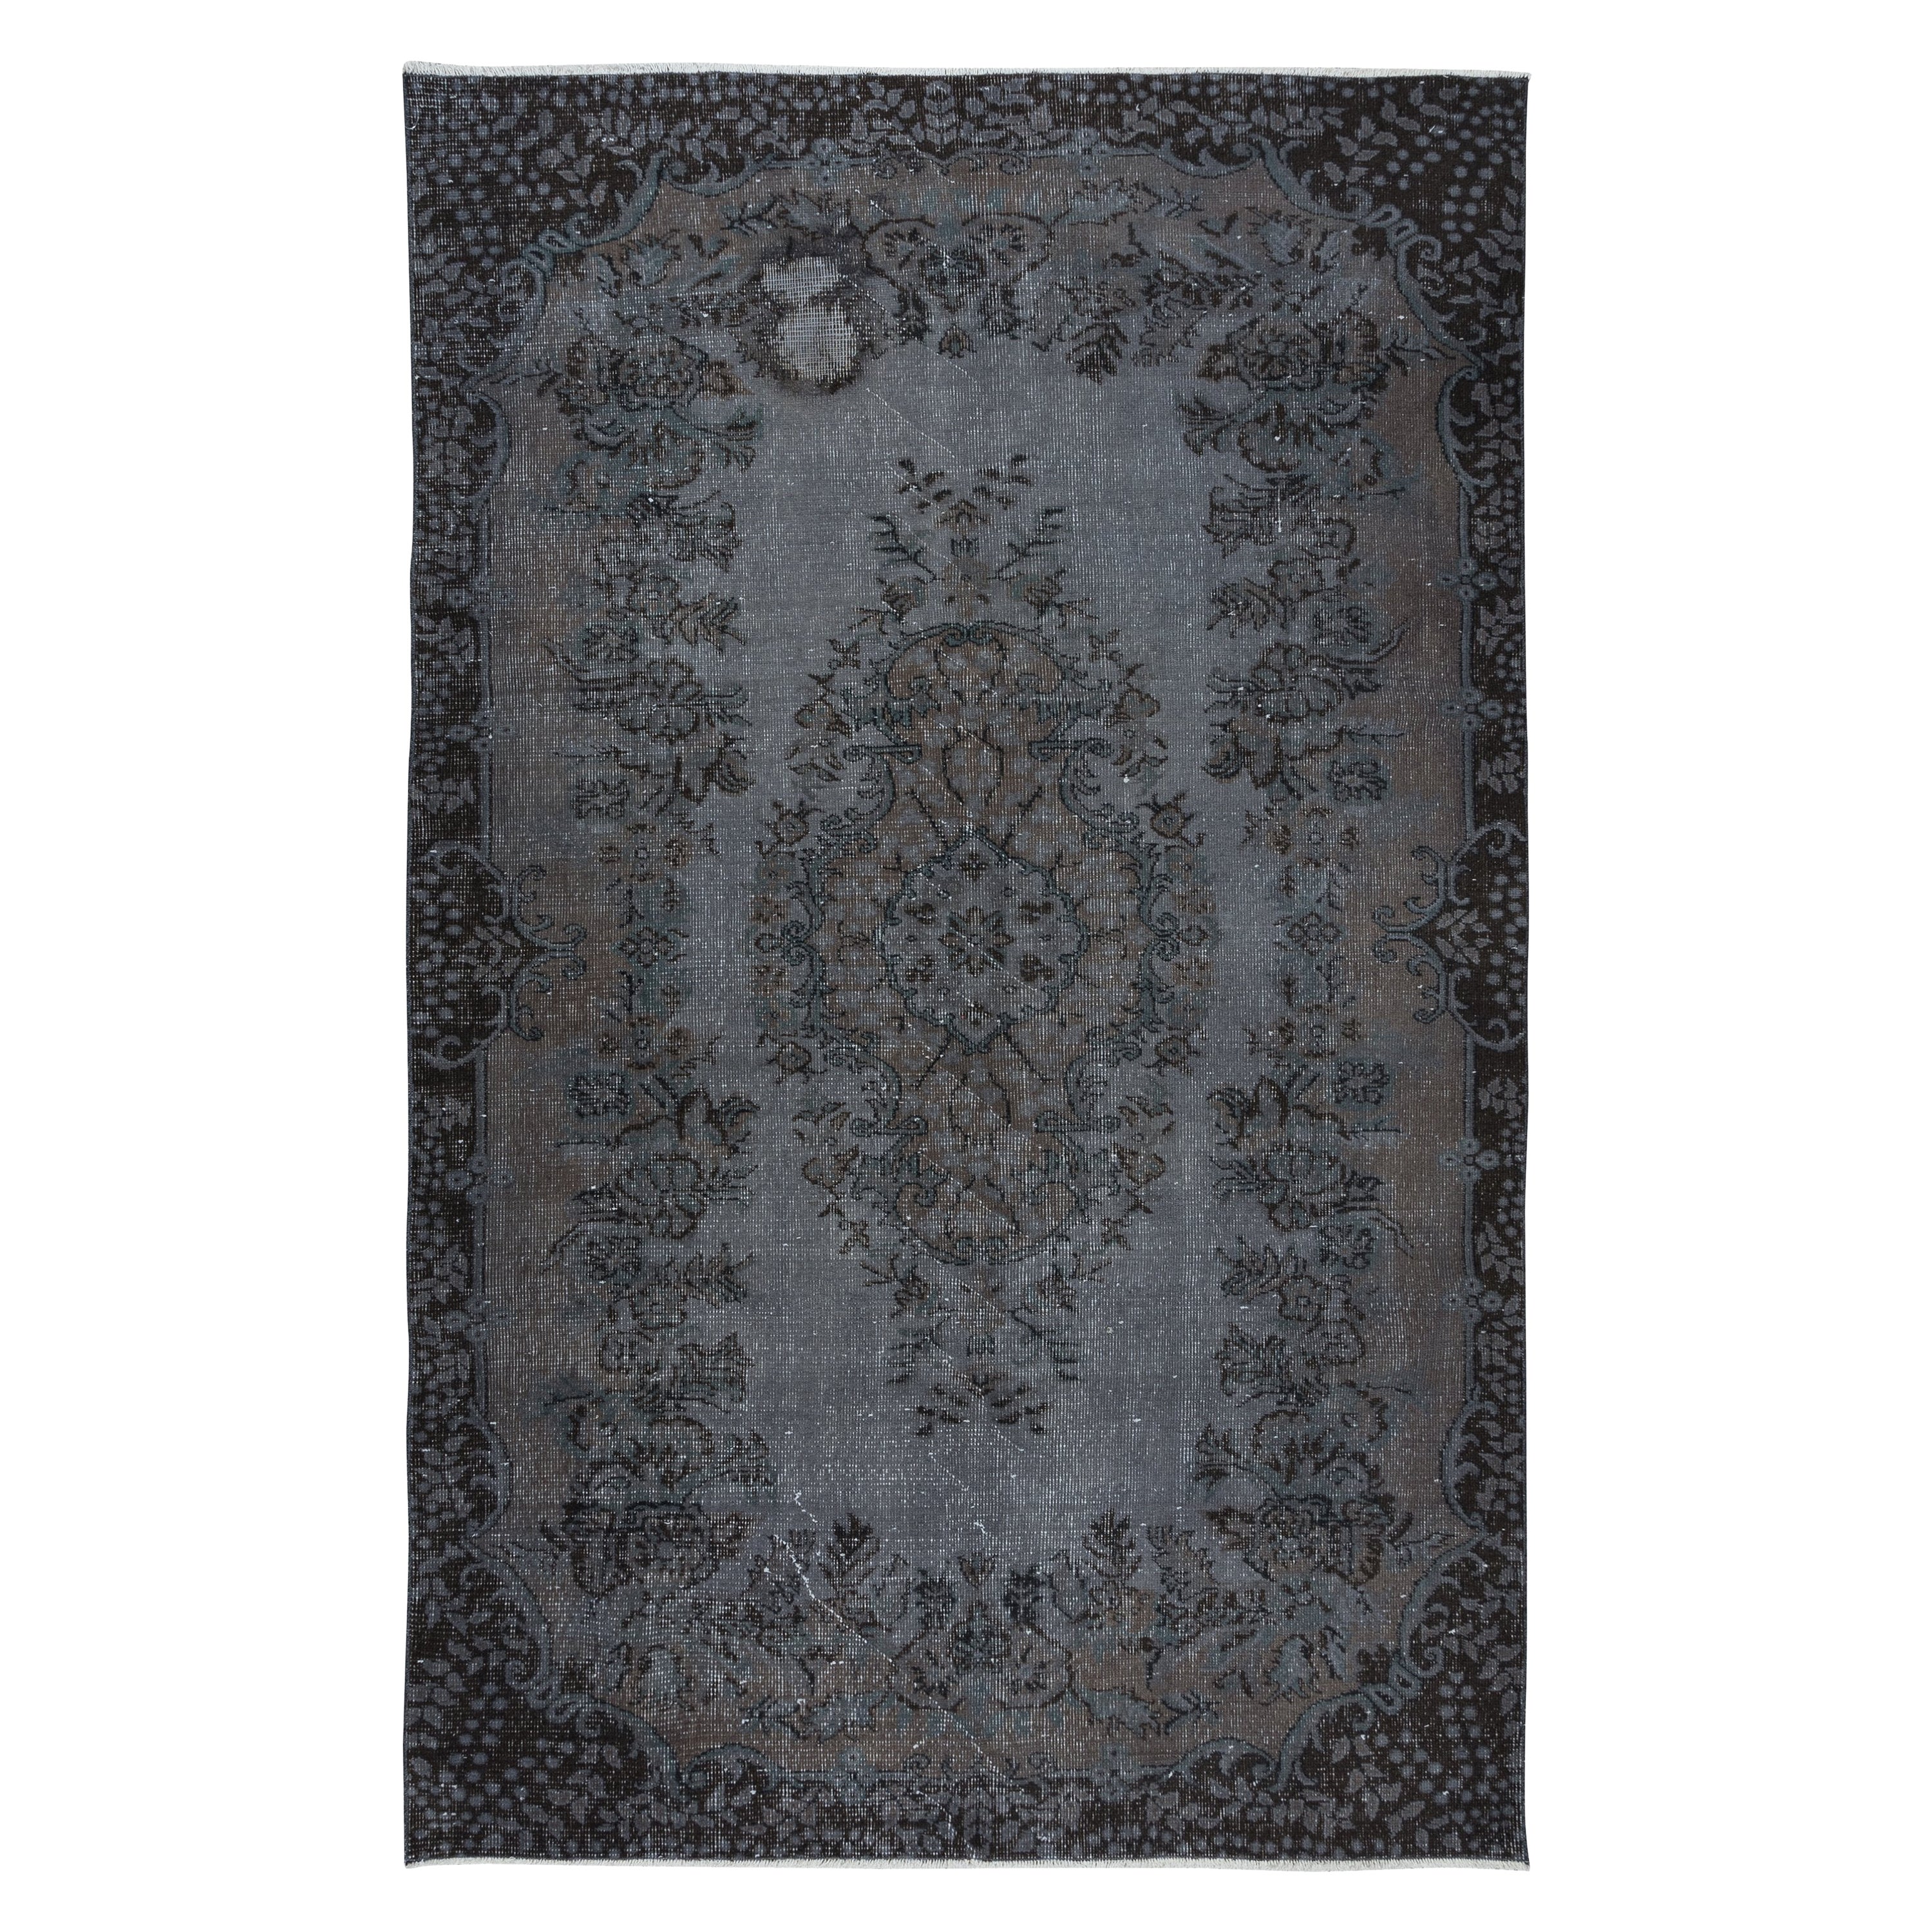 5.6x8.8 Ft Contemporary Handmade Gray Indoor Outdoor Rug with Medallion Design For Sale